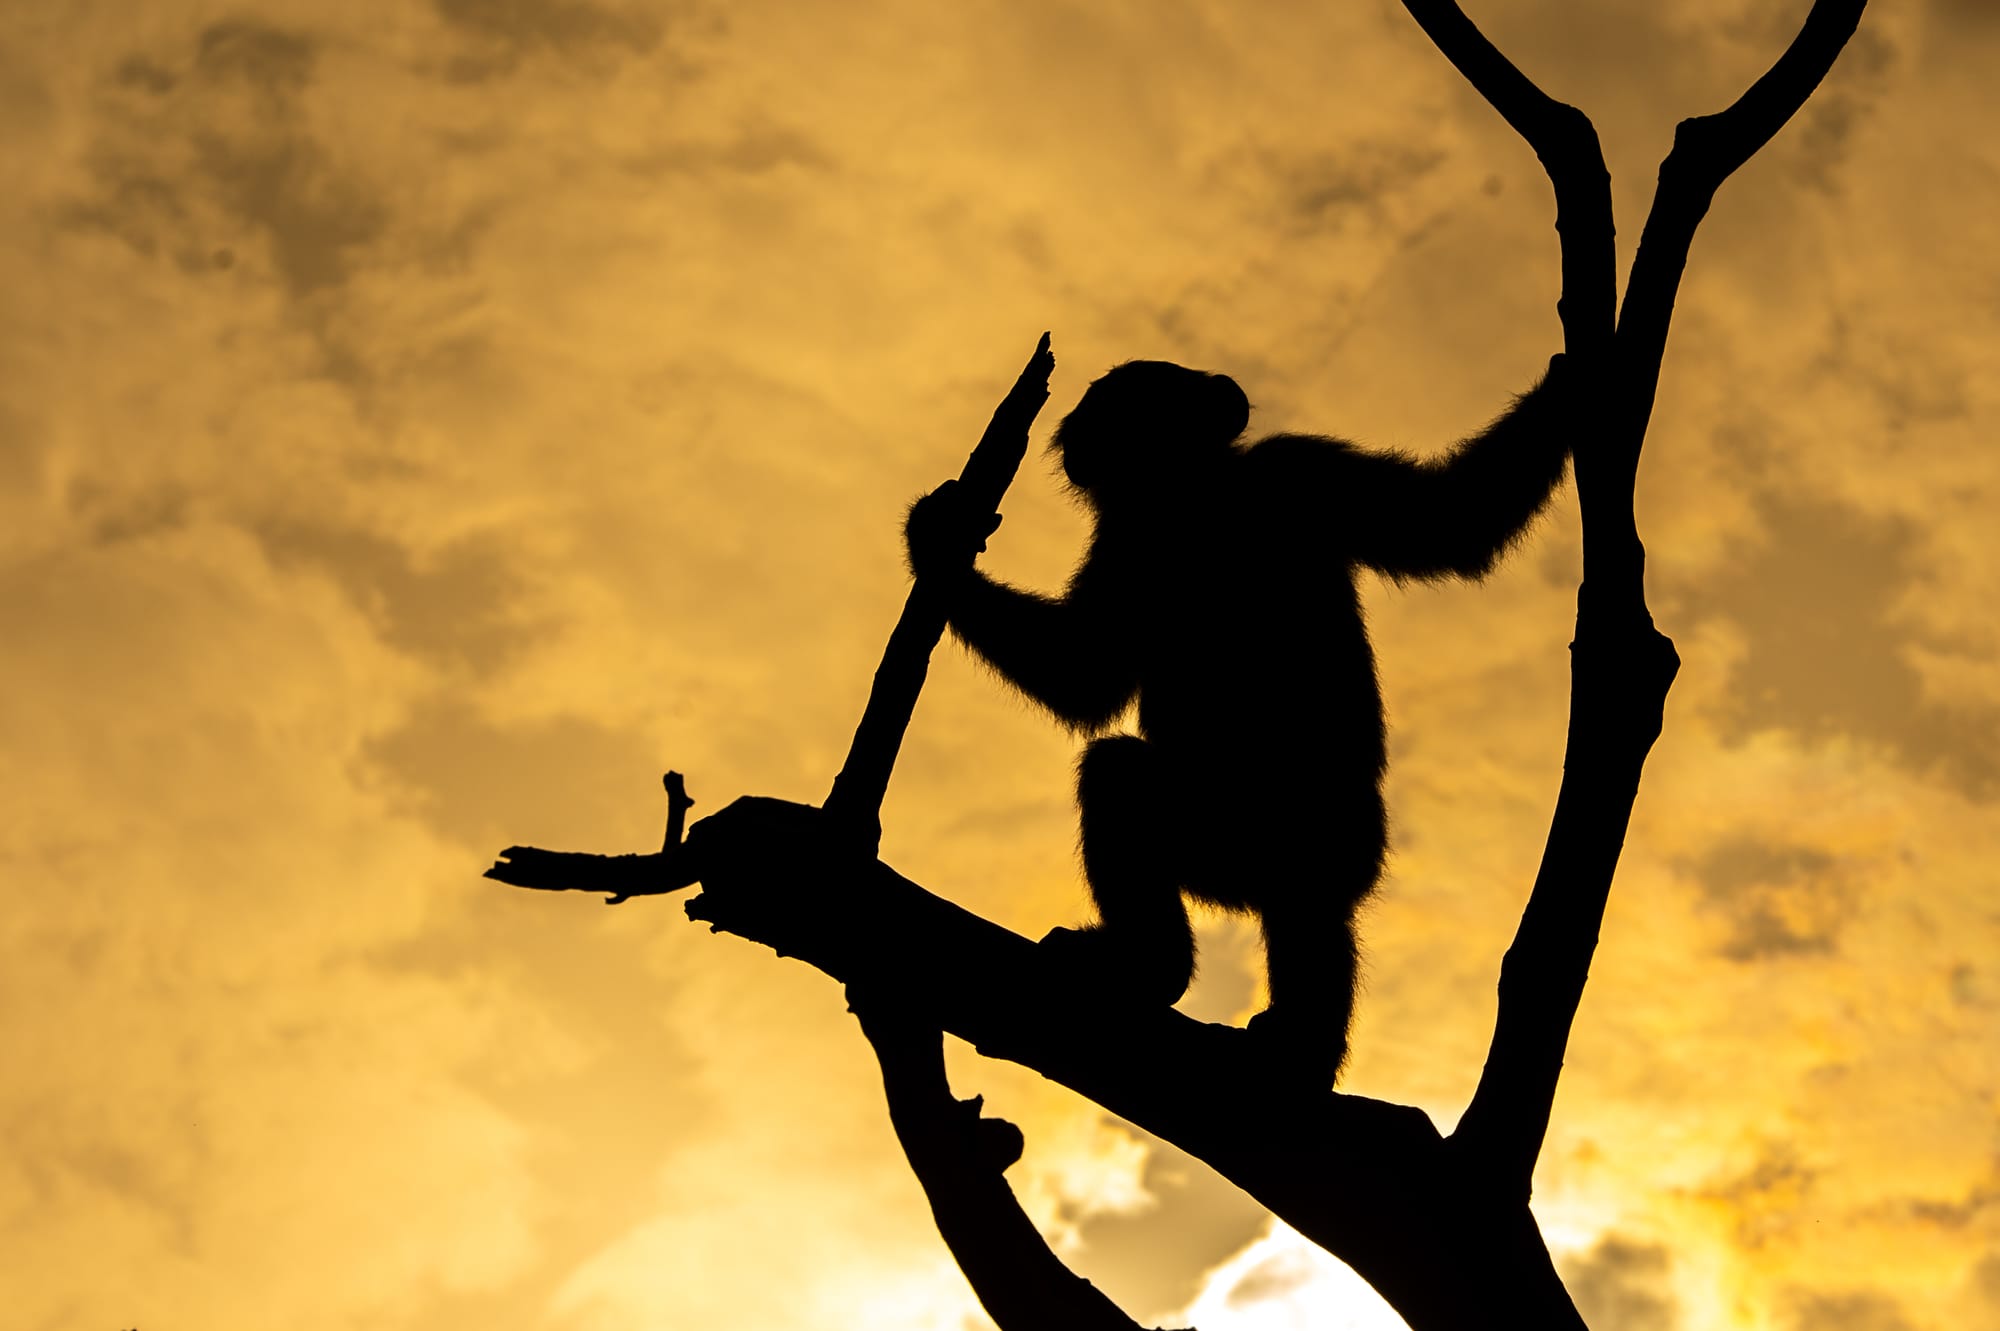 a chimpanzee in the trees, against a sunlit background